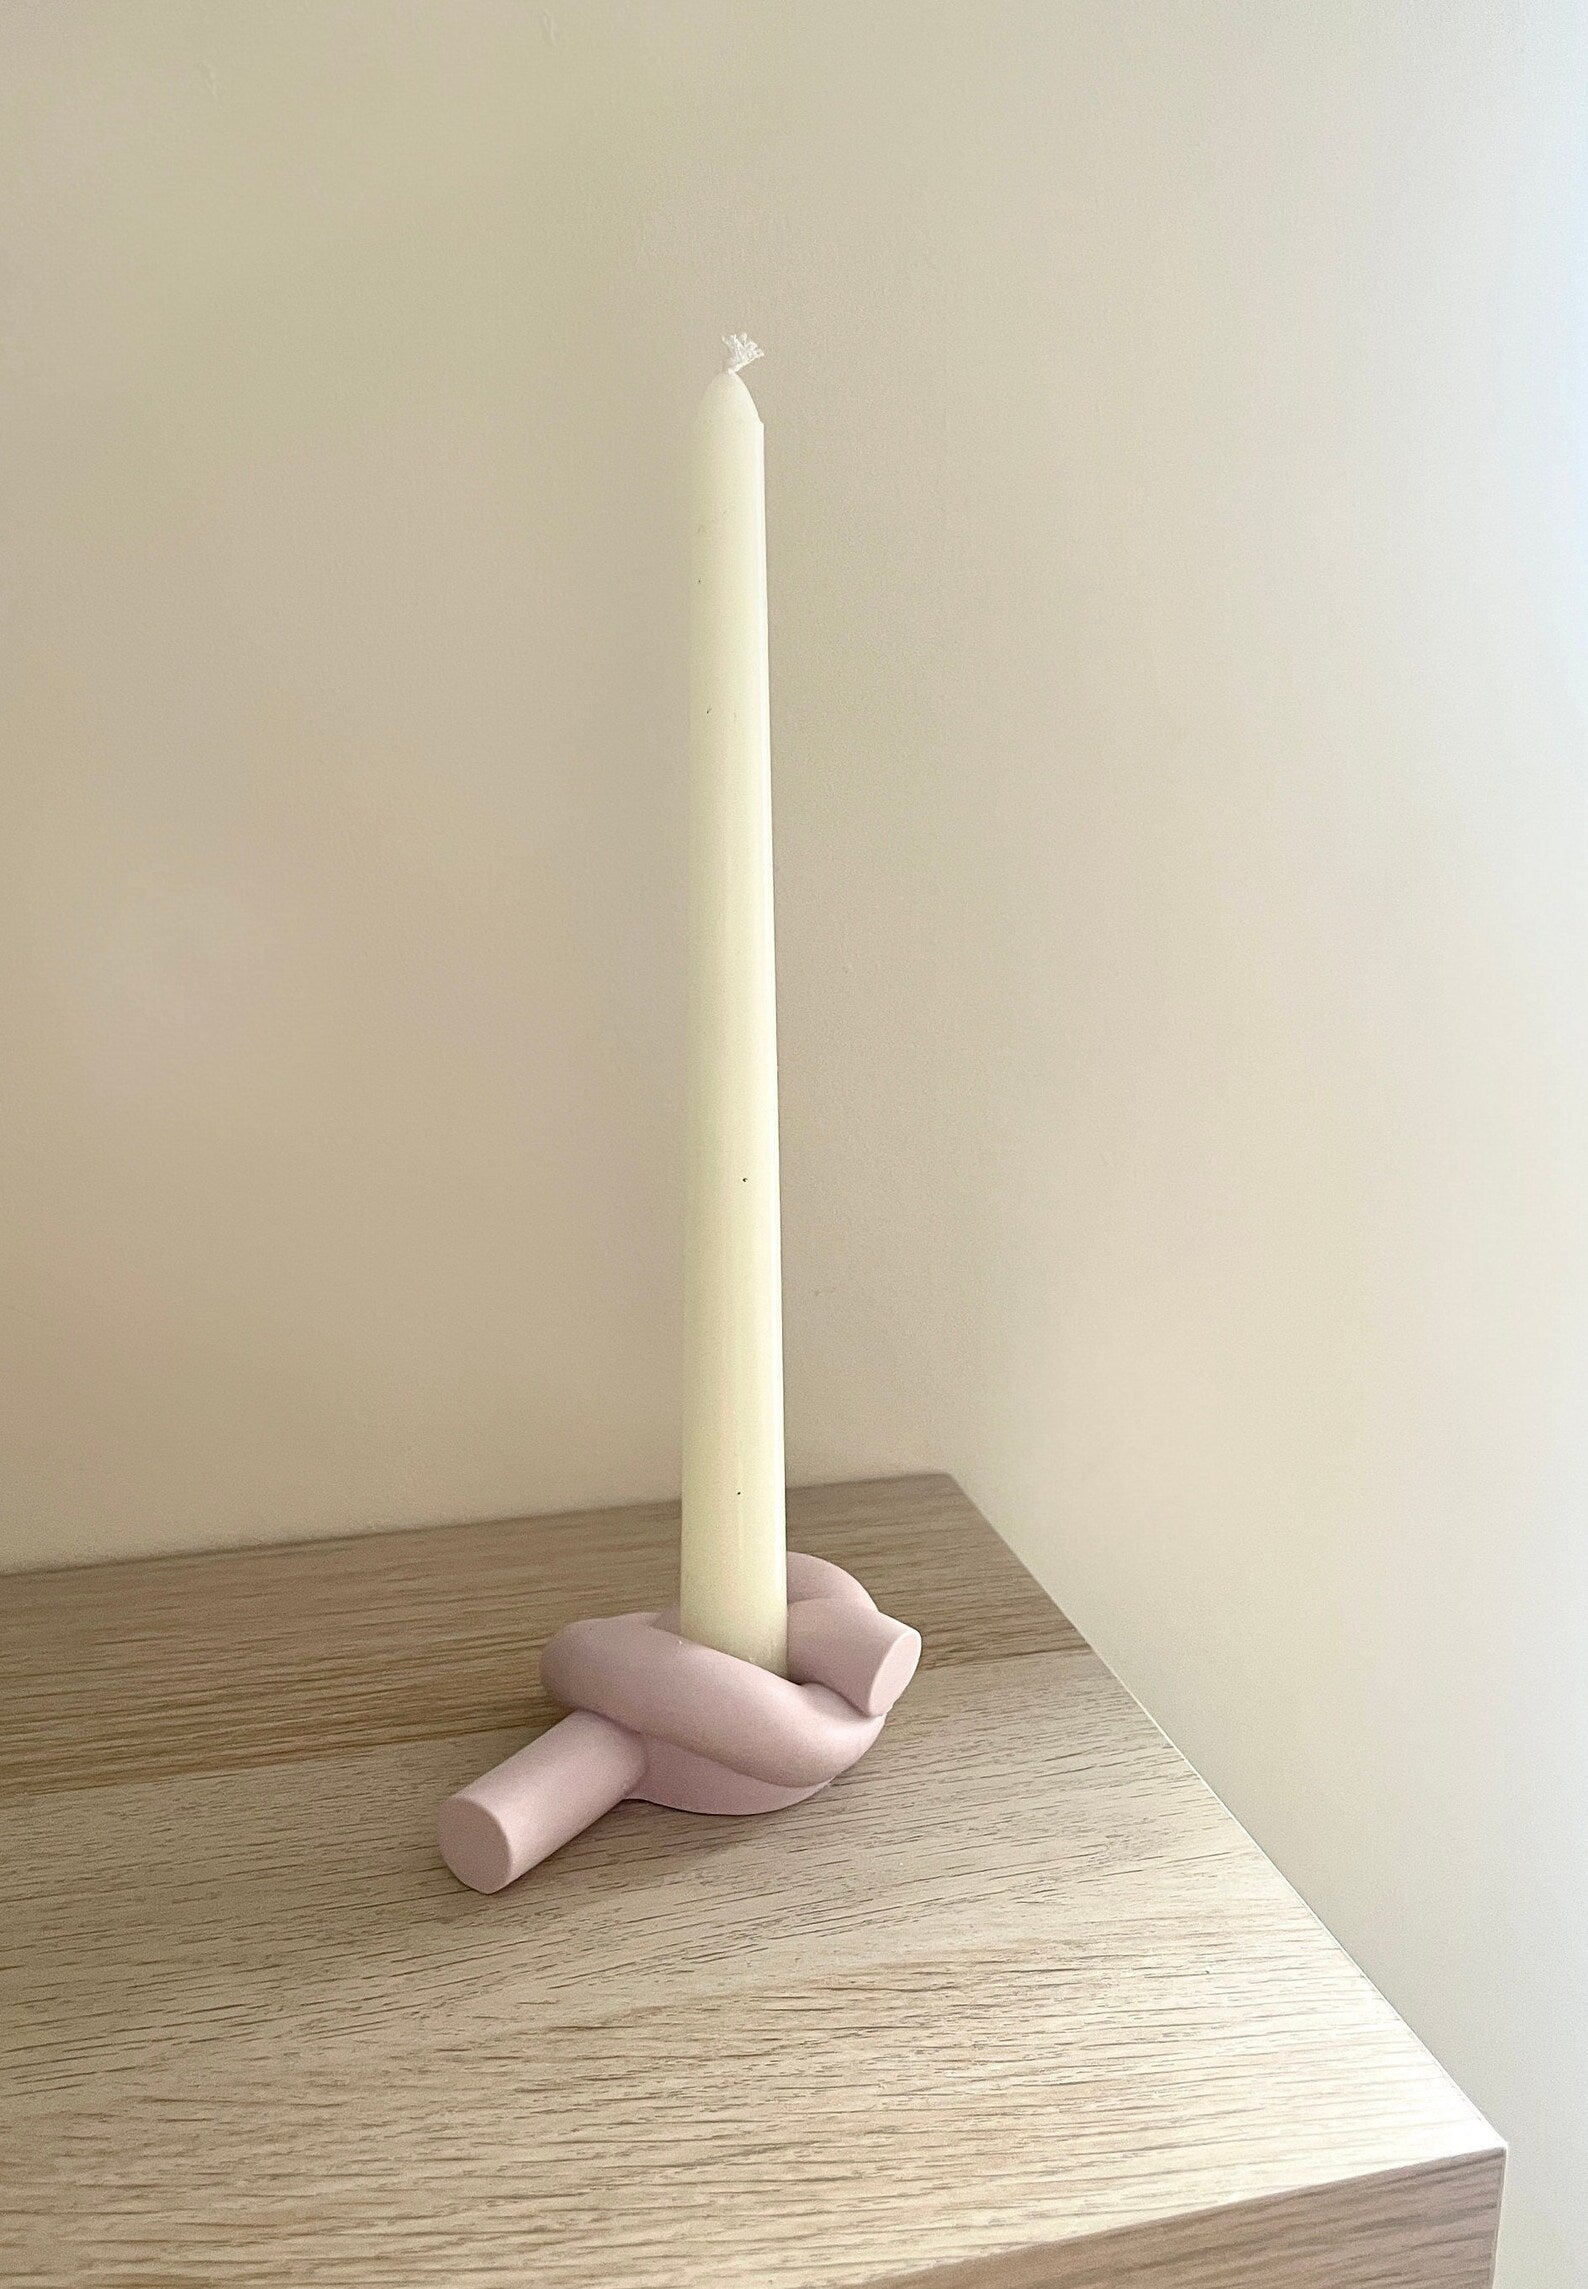 Knot shaped jesomite candlestick holder in Cream or Lilac